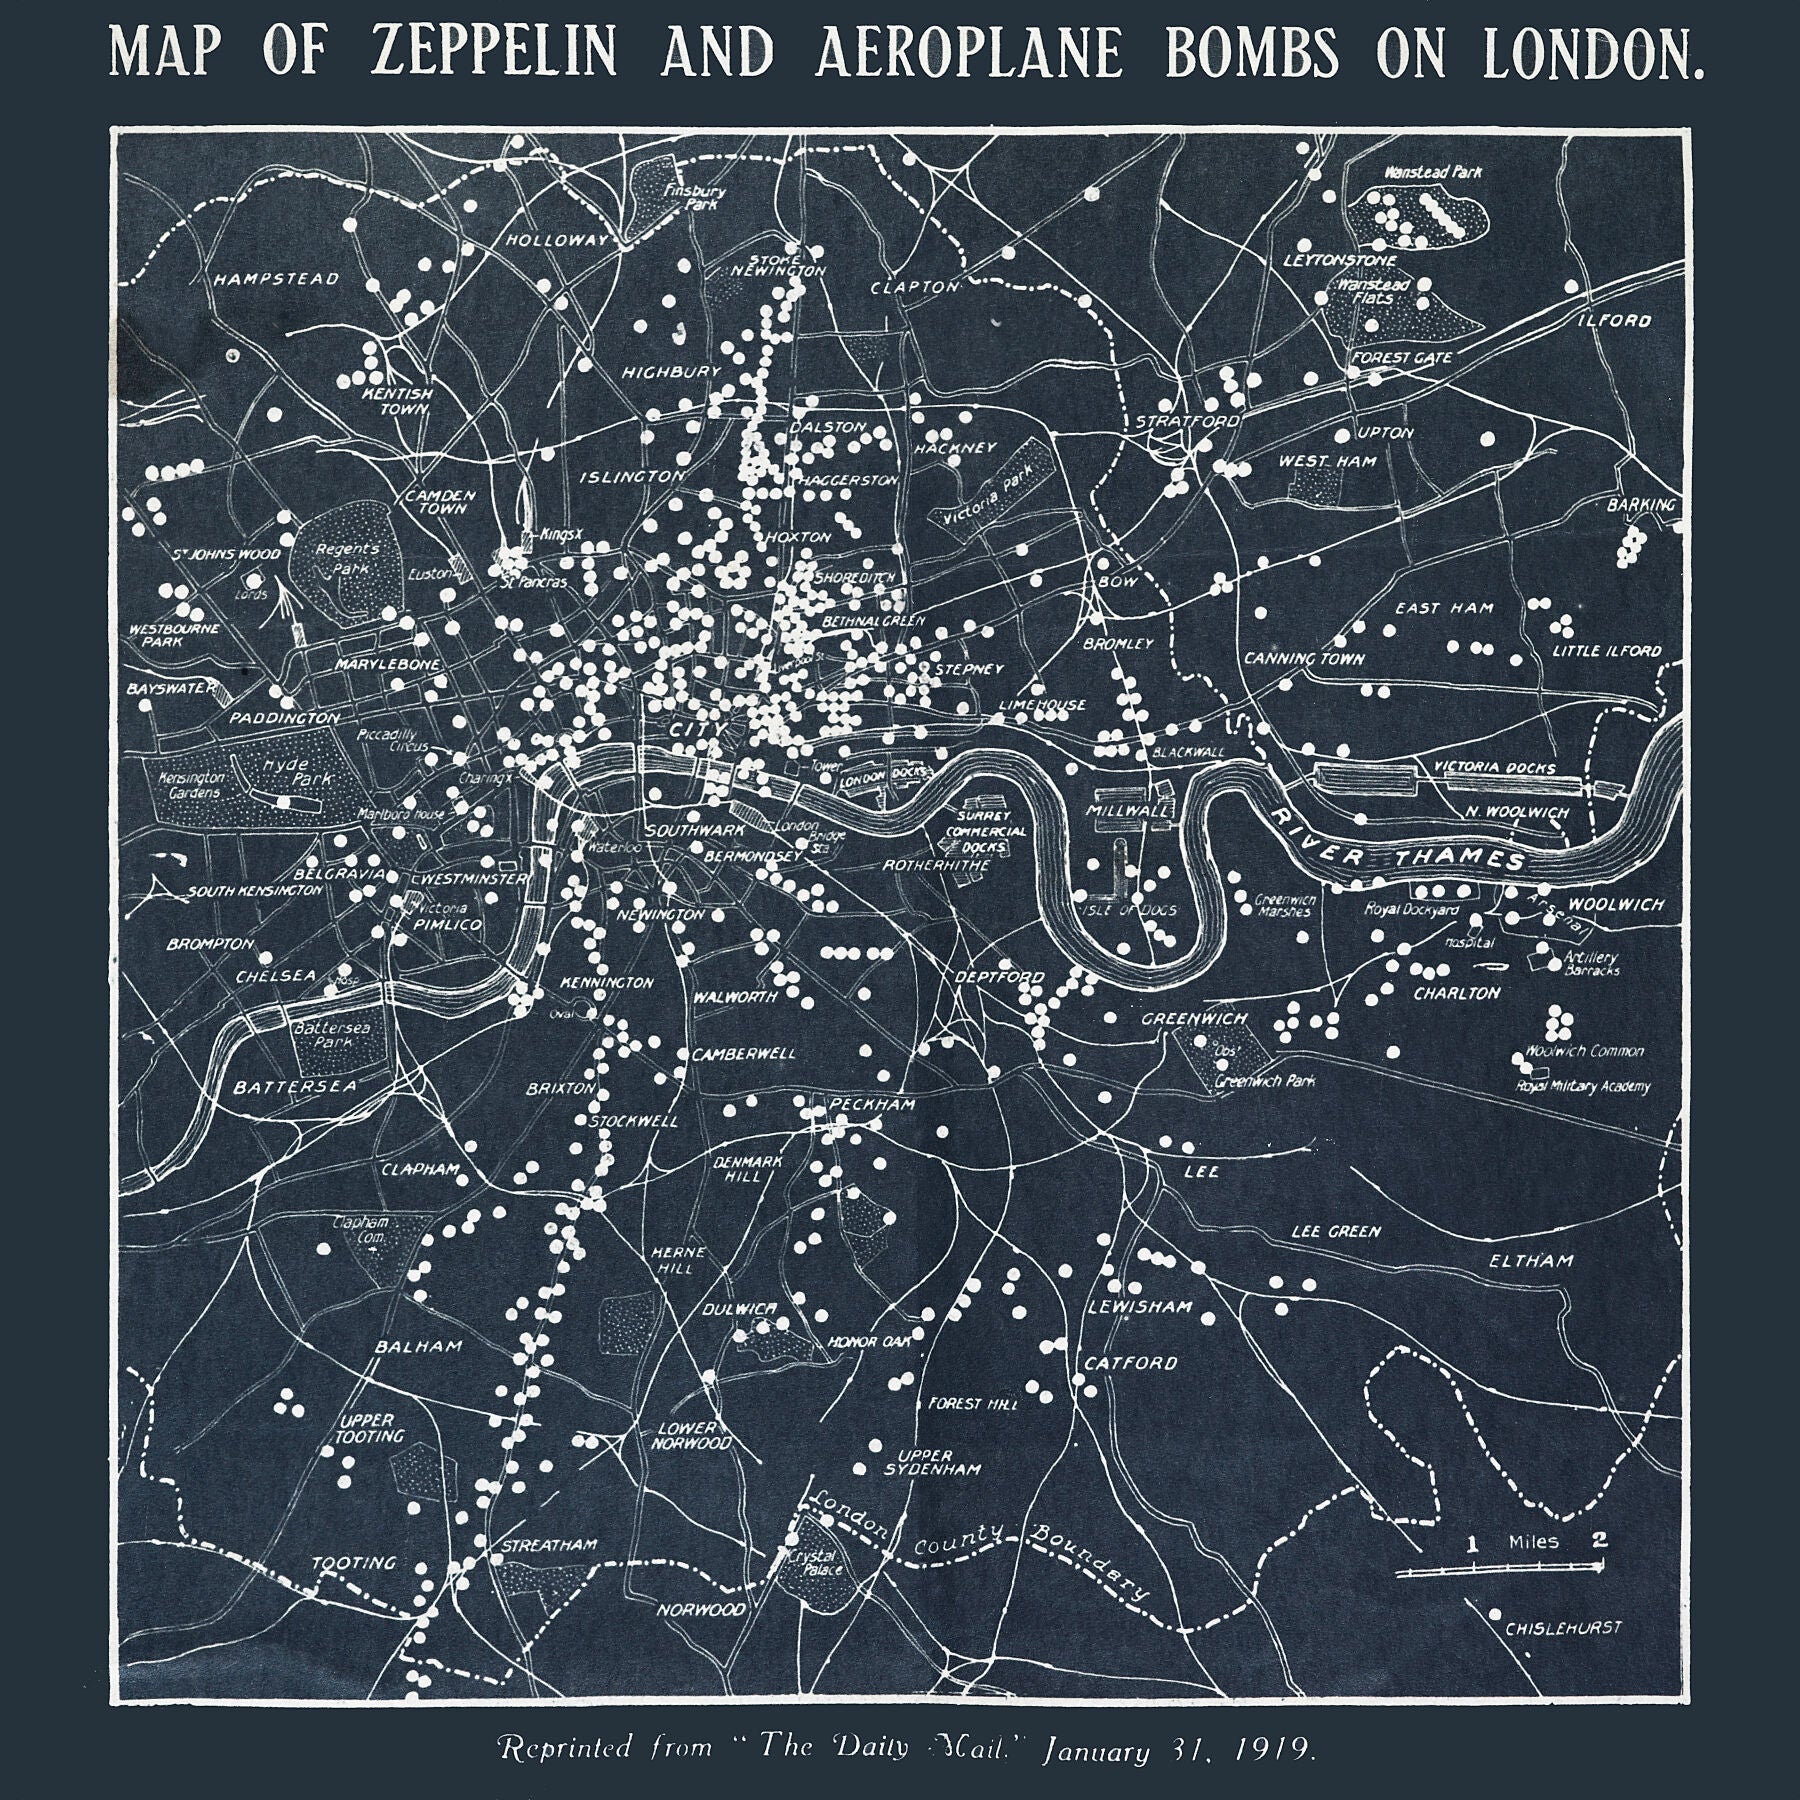 Map of Zeppelin and aeroplane bombs on London. From_ World War I photograph album by Herbert Green 1919